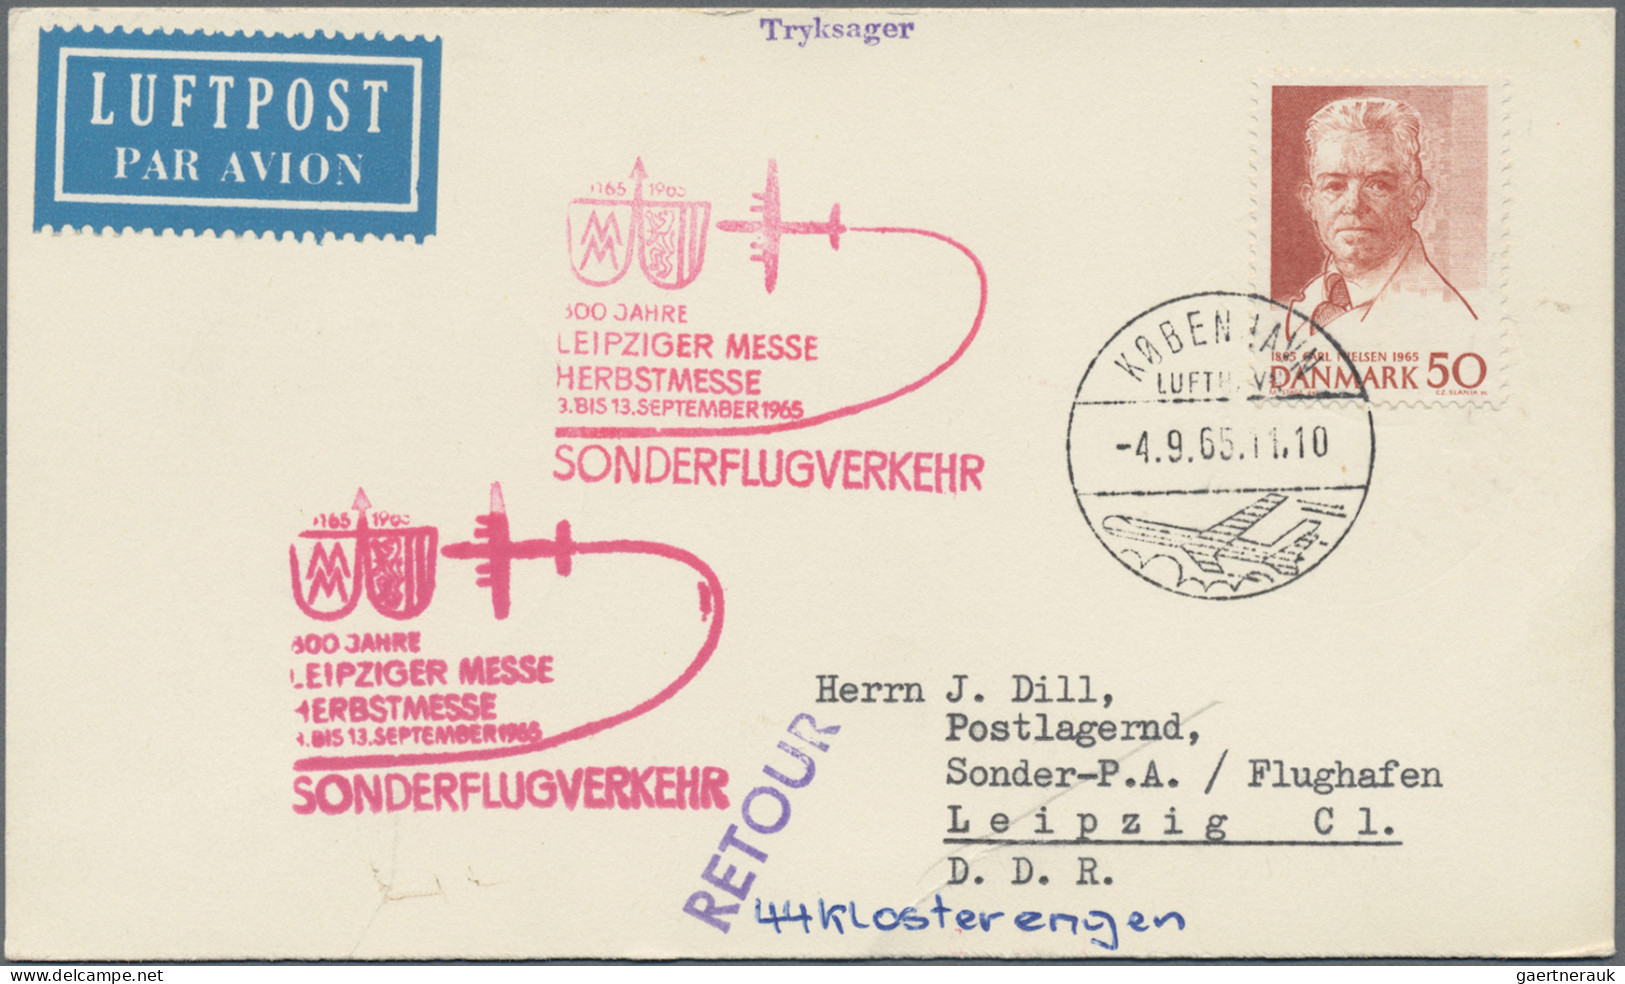 Denmark: 1936/1978, assortment of apprx. 140 airmail covers/cards, showing espec